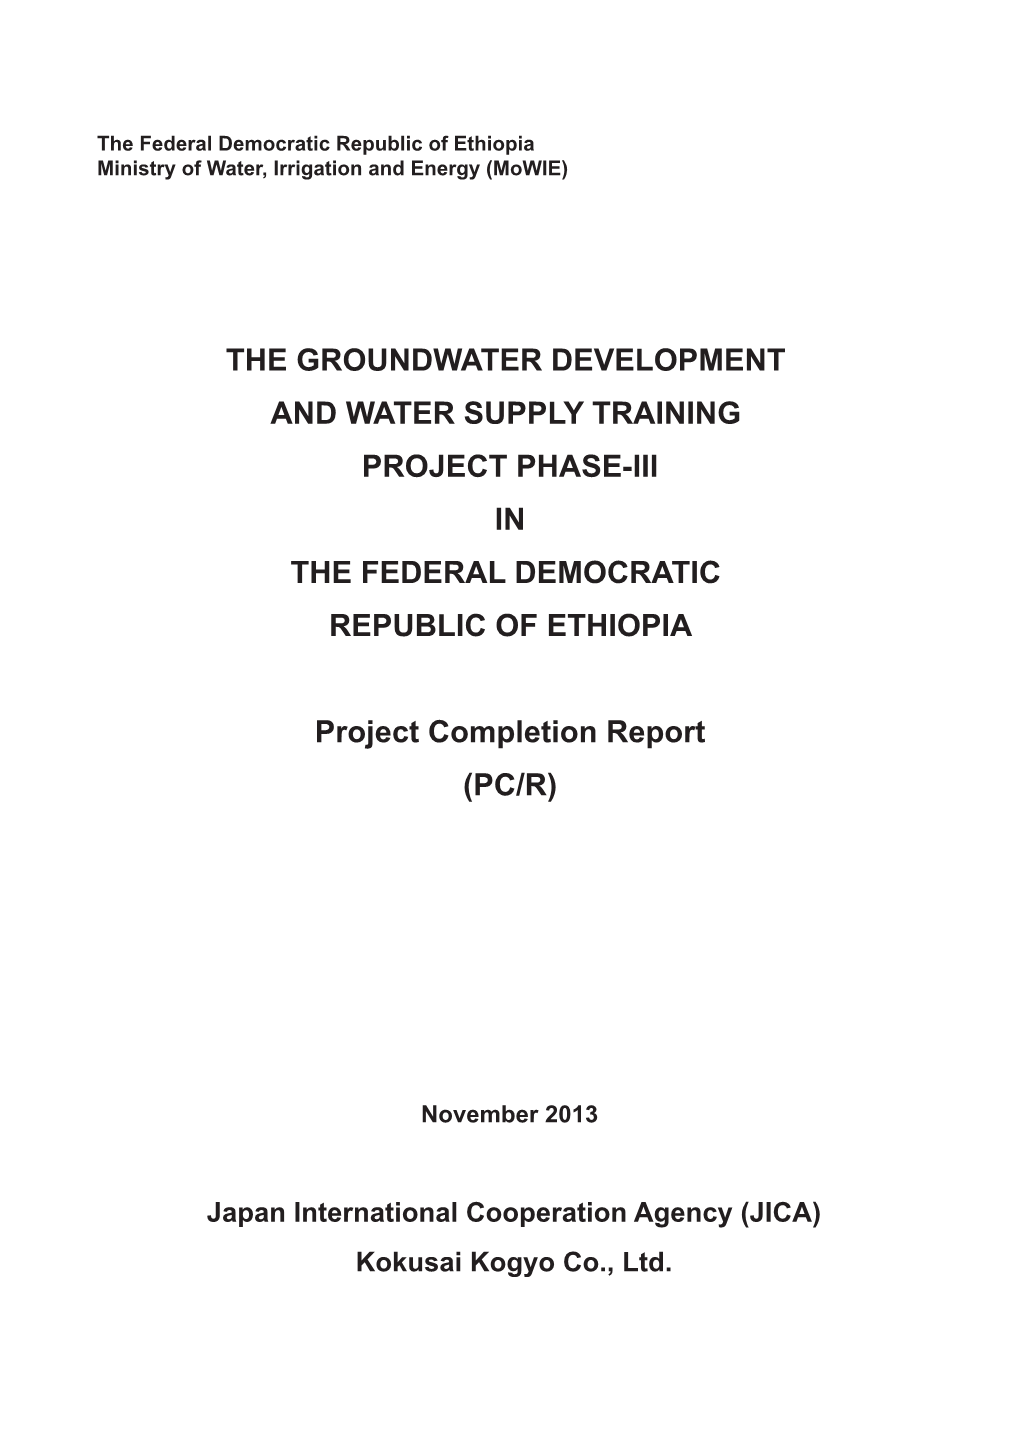 The Groundwater Development and Water Supply Training Project Phase-Iii in the Federal Democratic Republic of Ethiopia